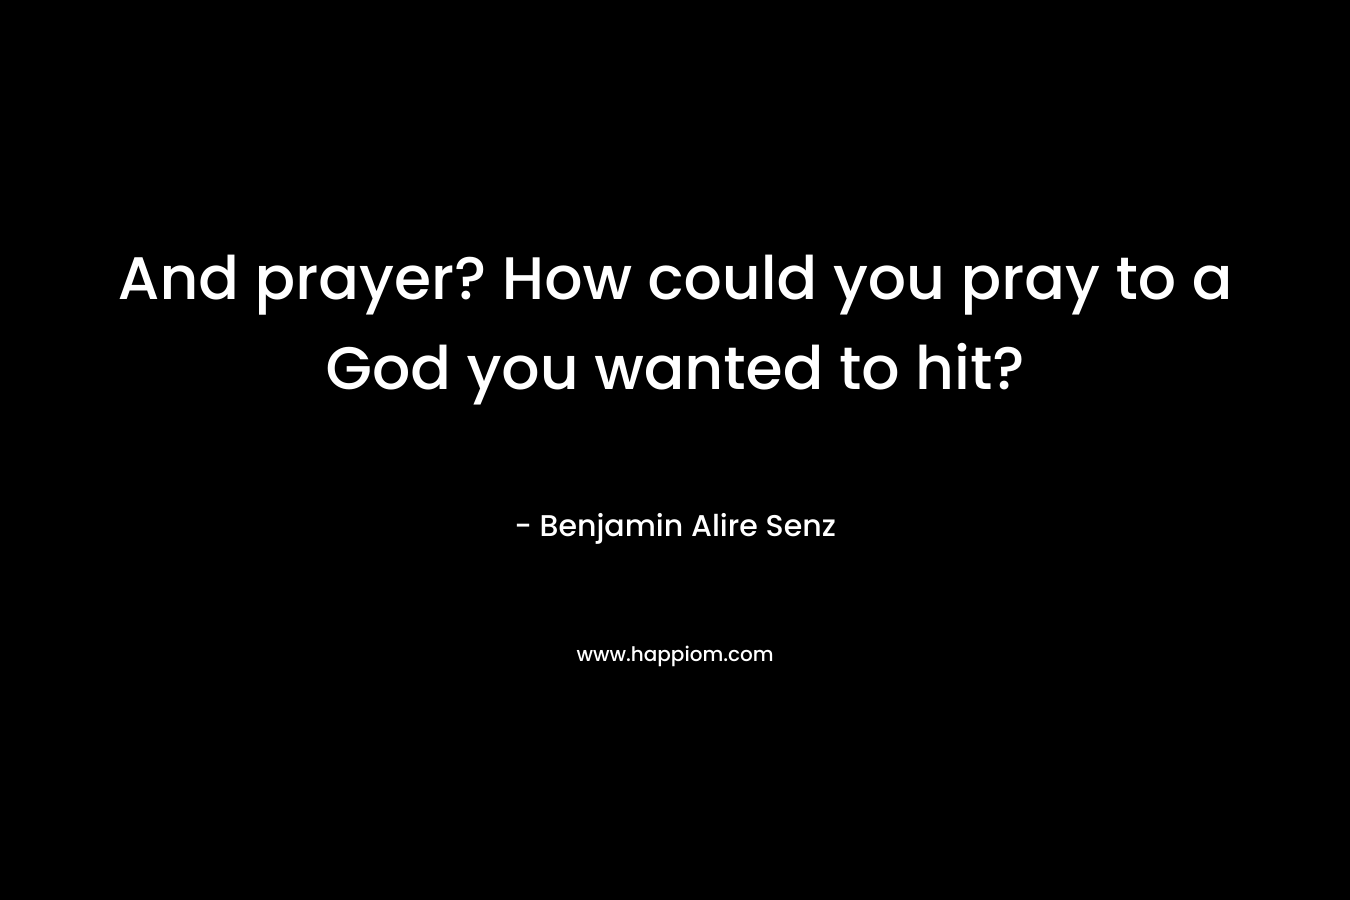 And prayer? How could you pray to a God you wanted to hit?